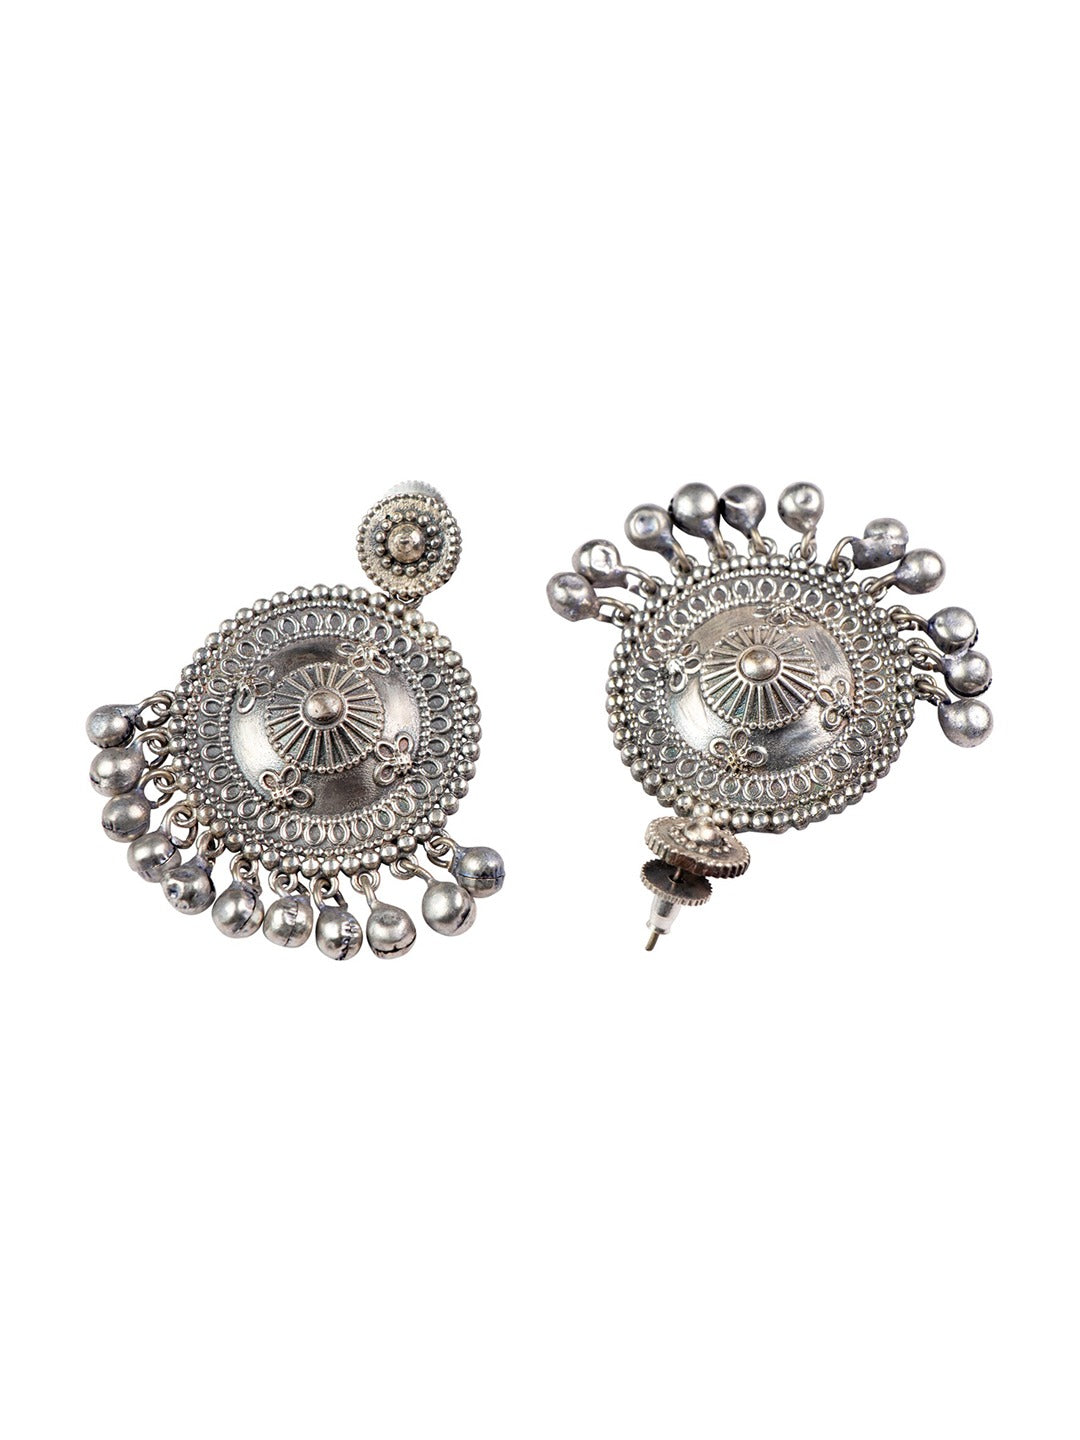 Women's Silver-Plated Contemporary Drop Earrings - Morkanth